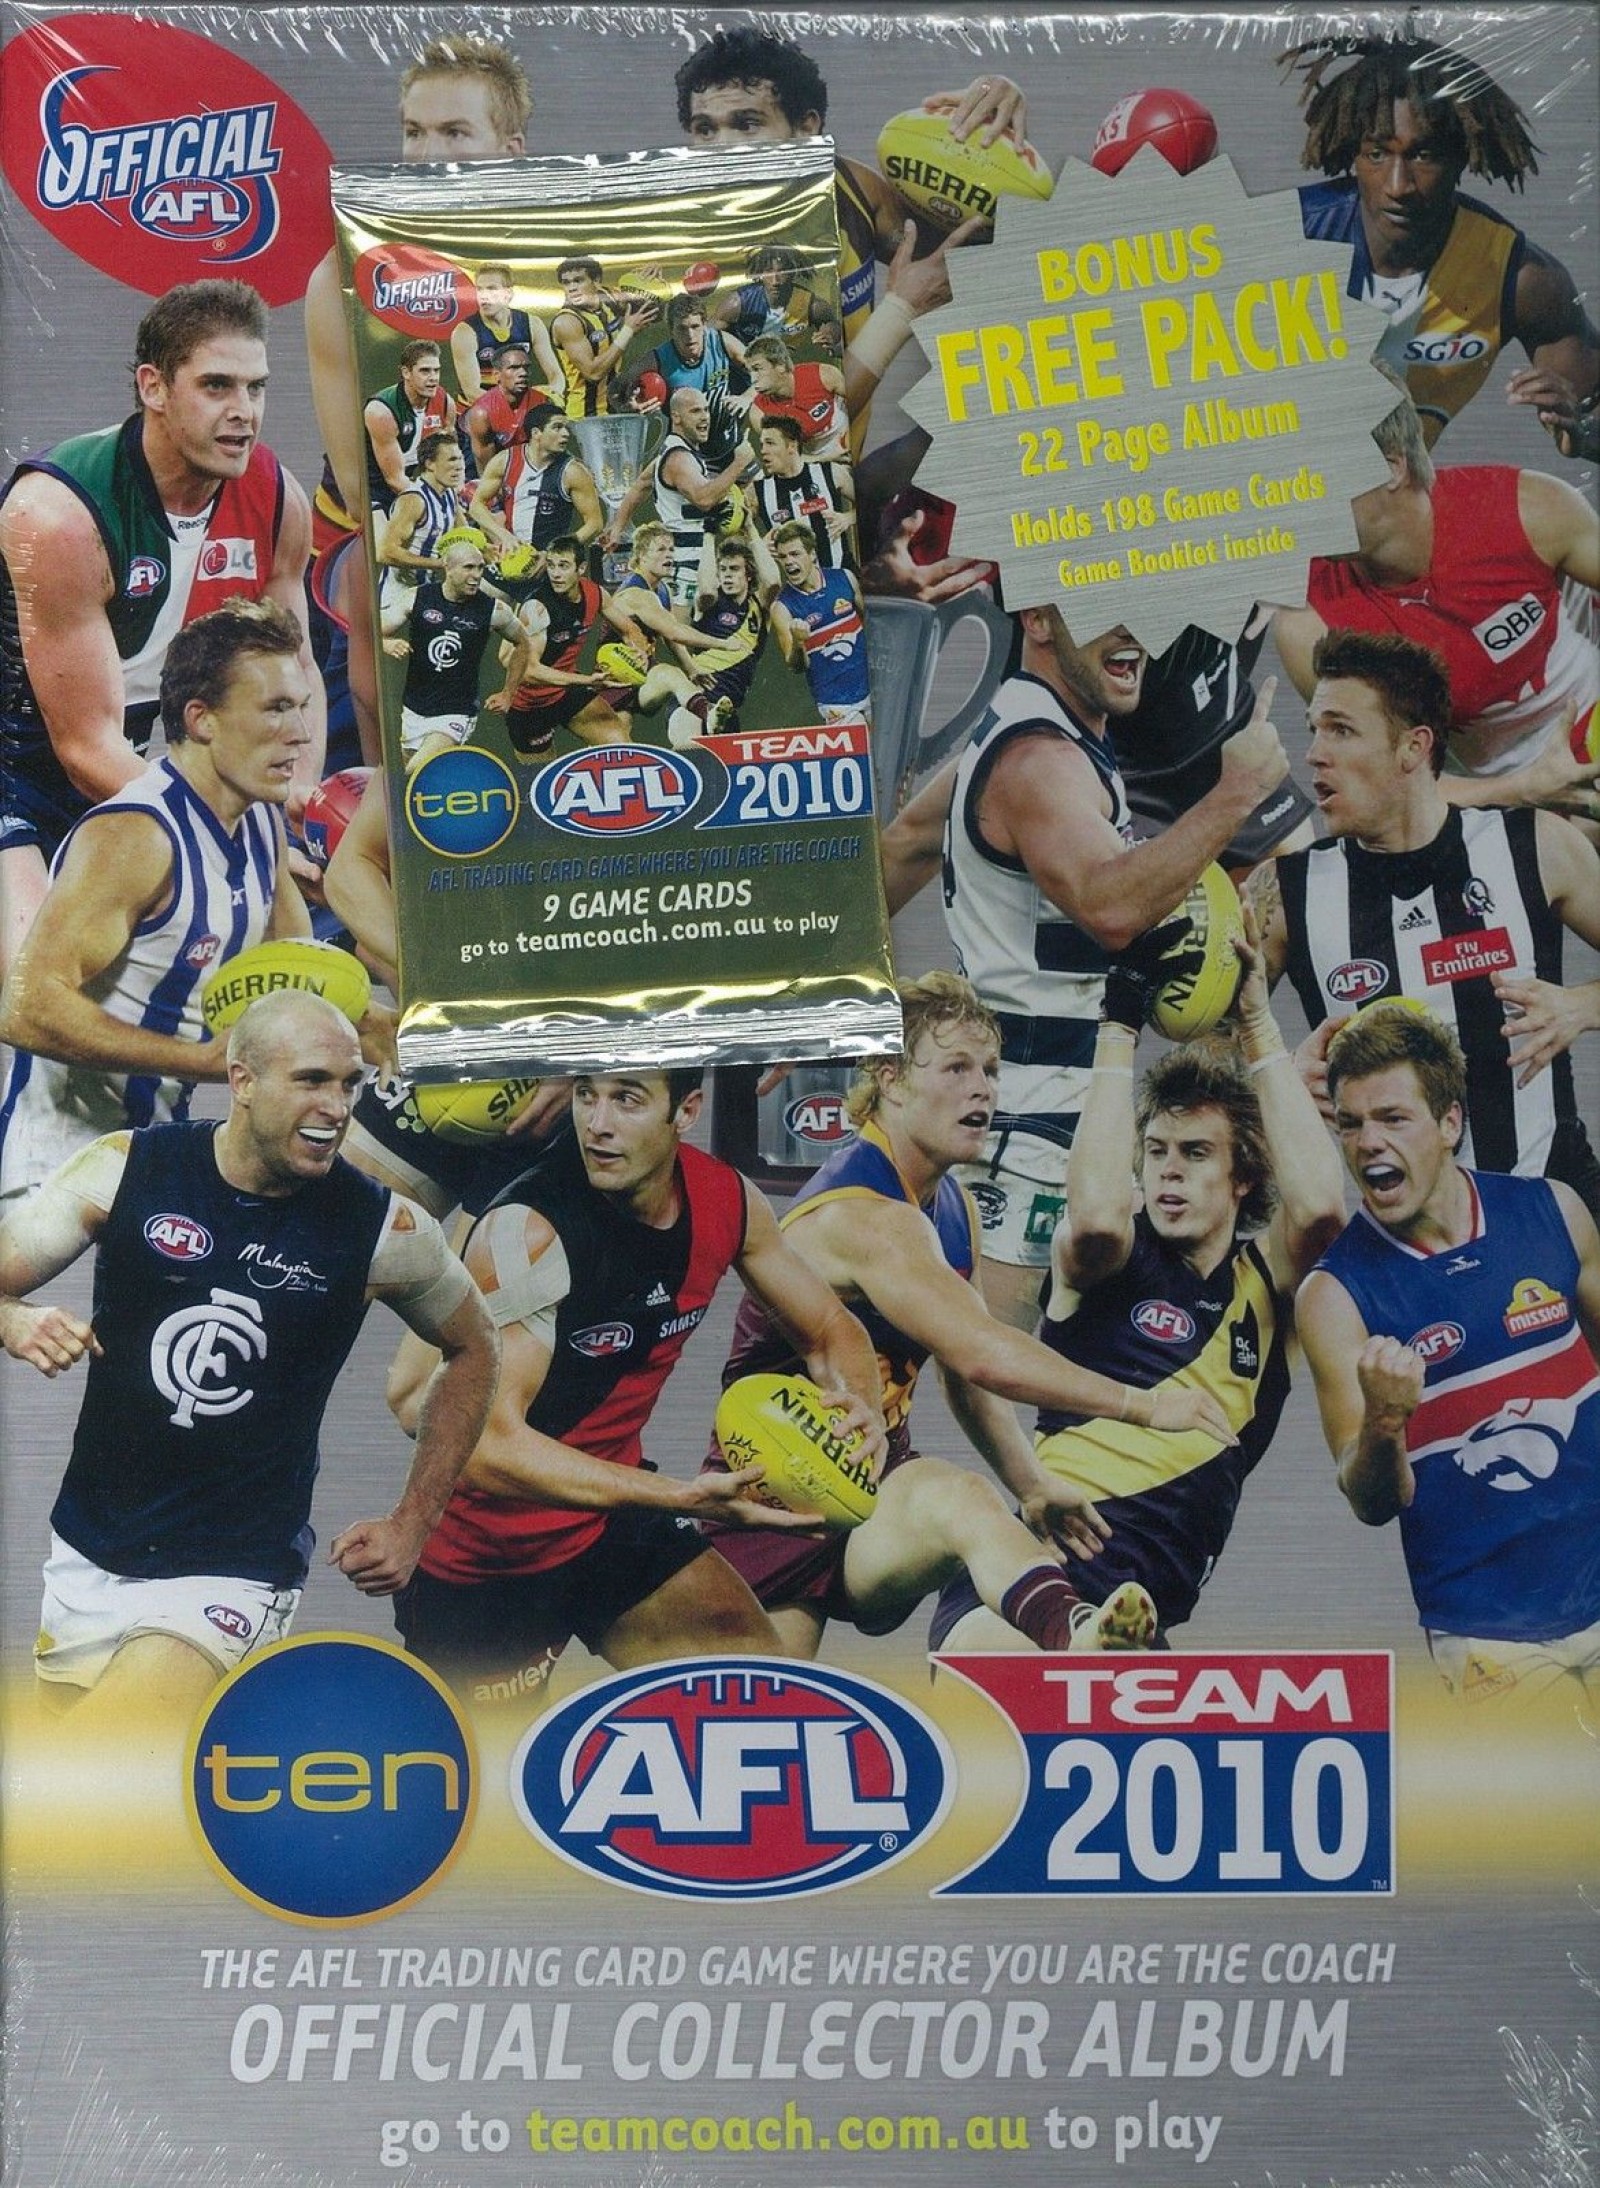 AFL 2010 Teamcoach ALBUM (includes 1 free pack)